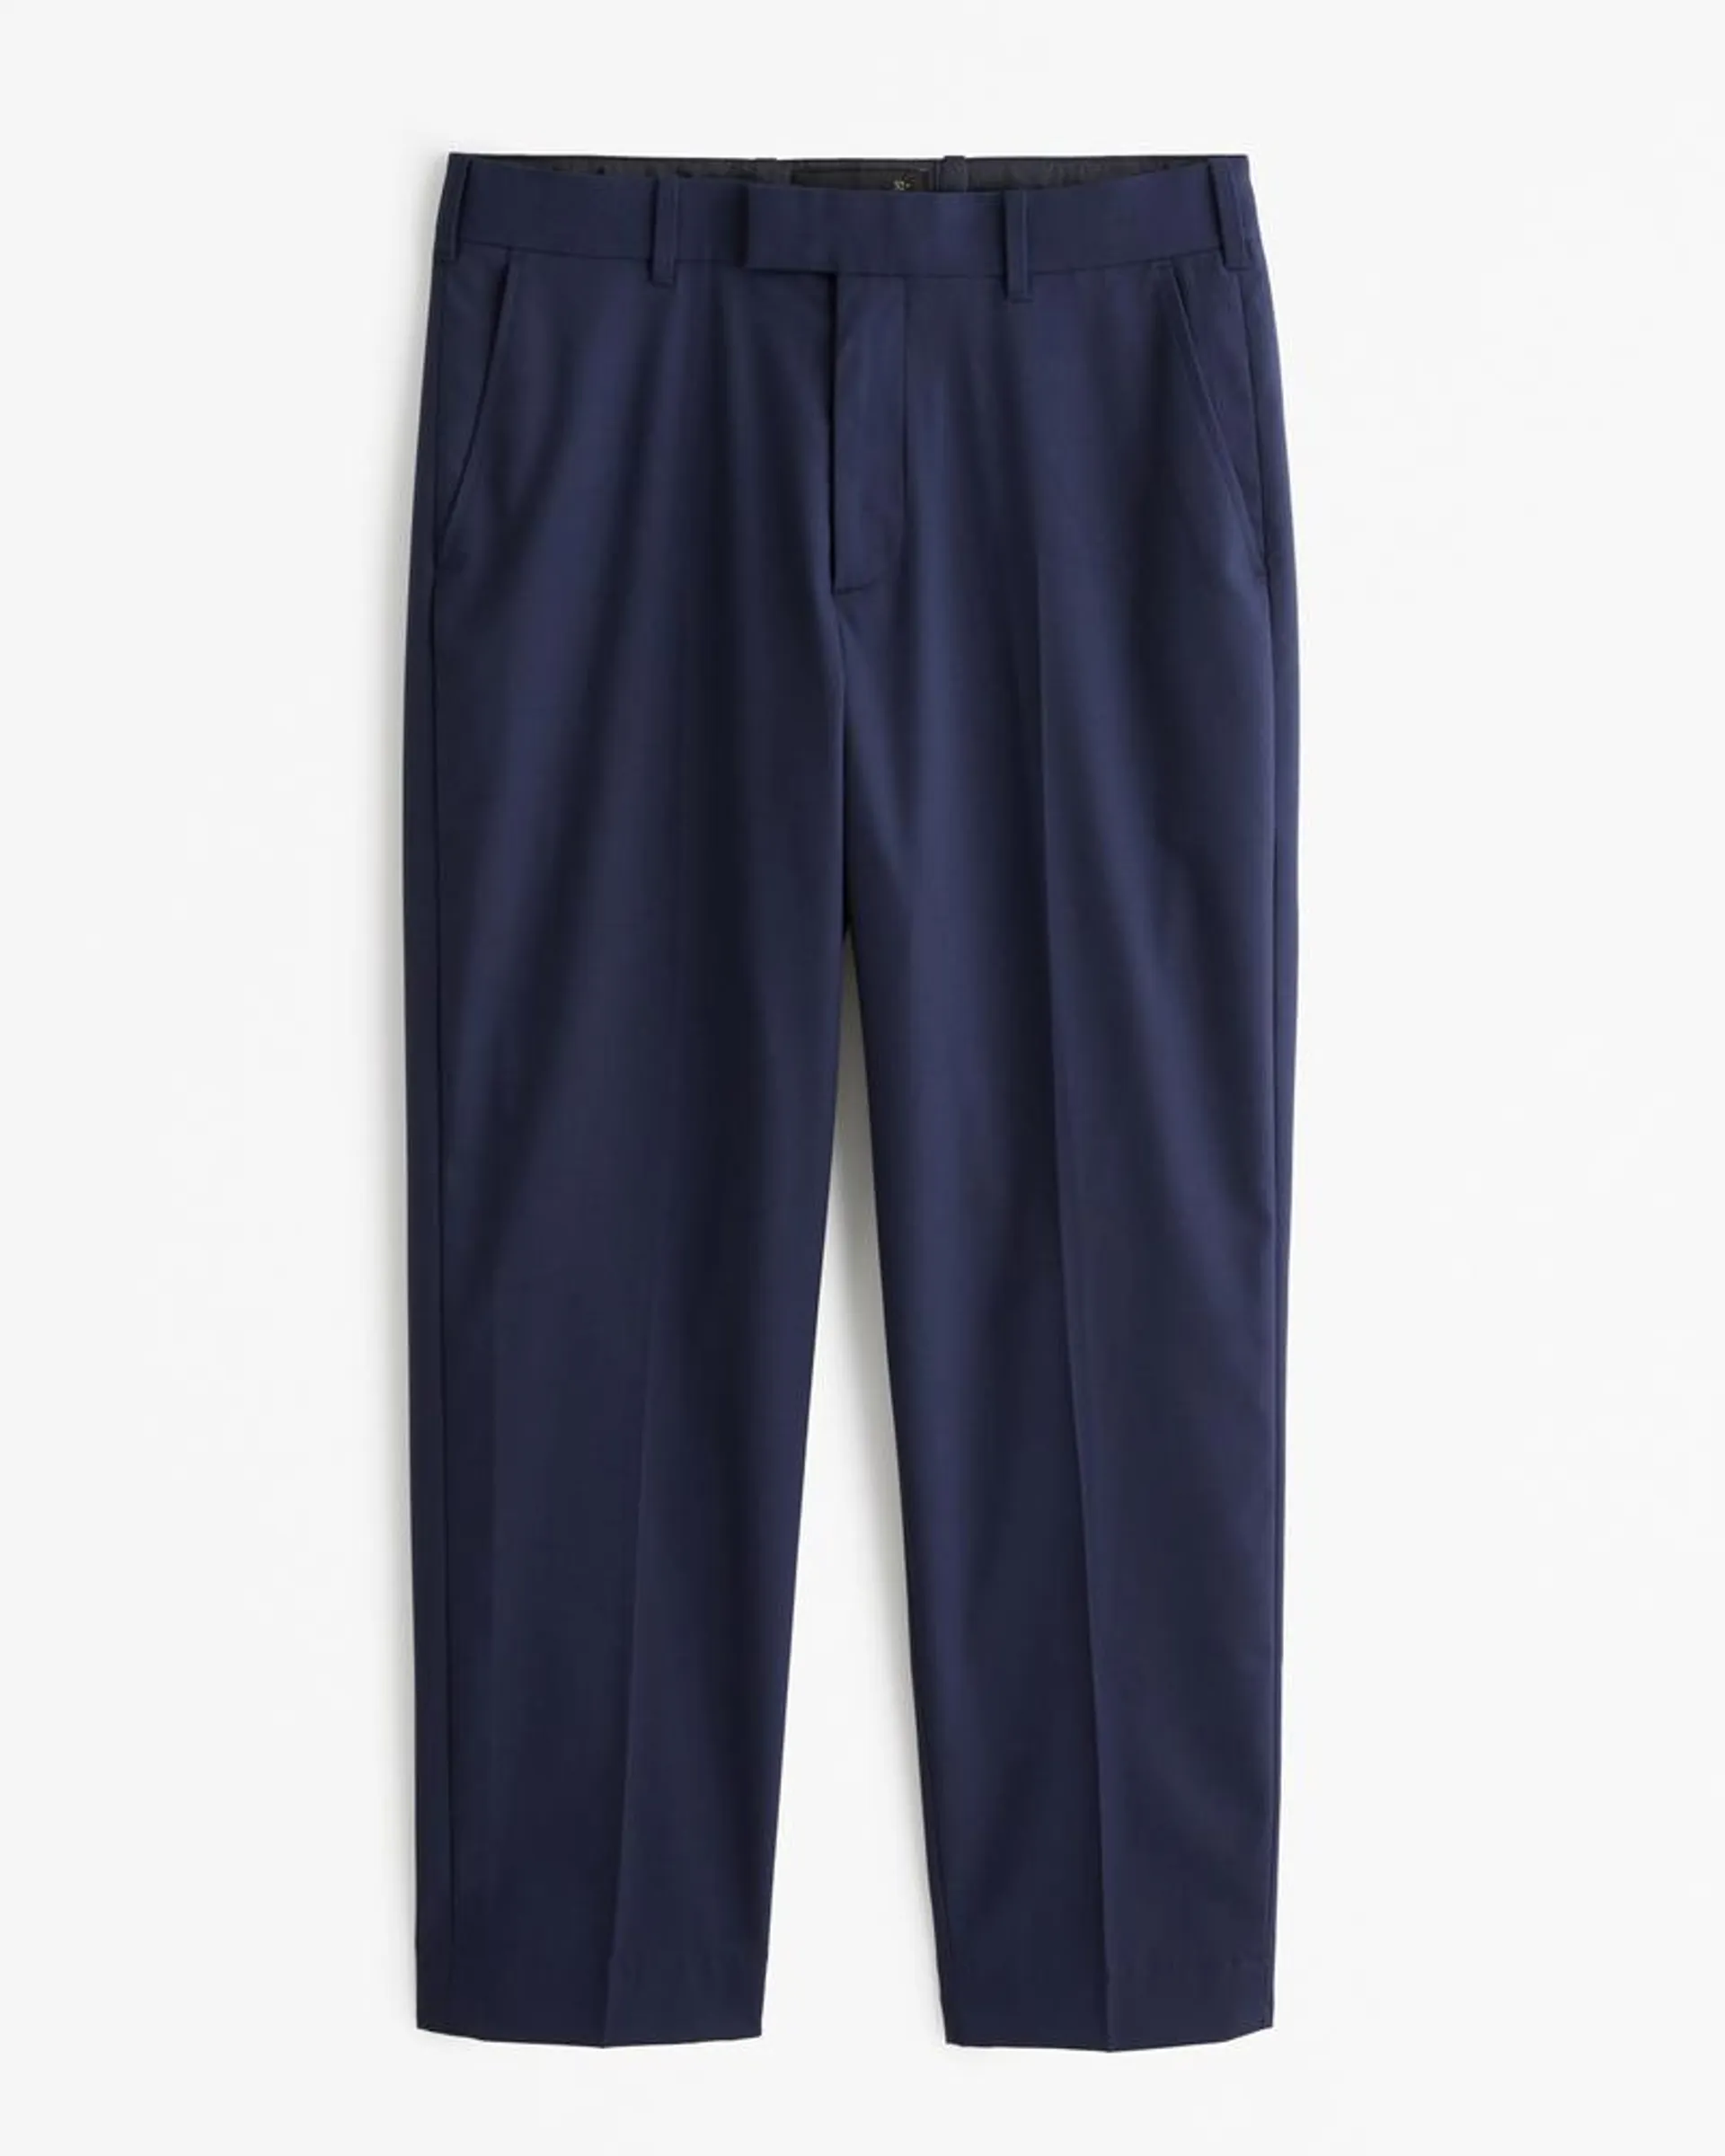 The A&F Collins Tailored Suit Pant